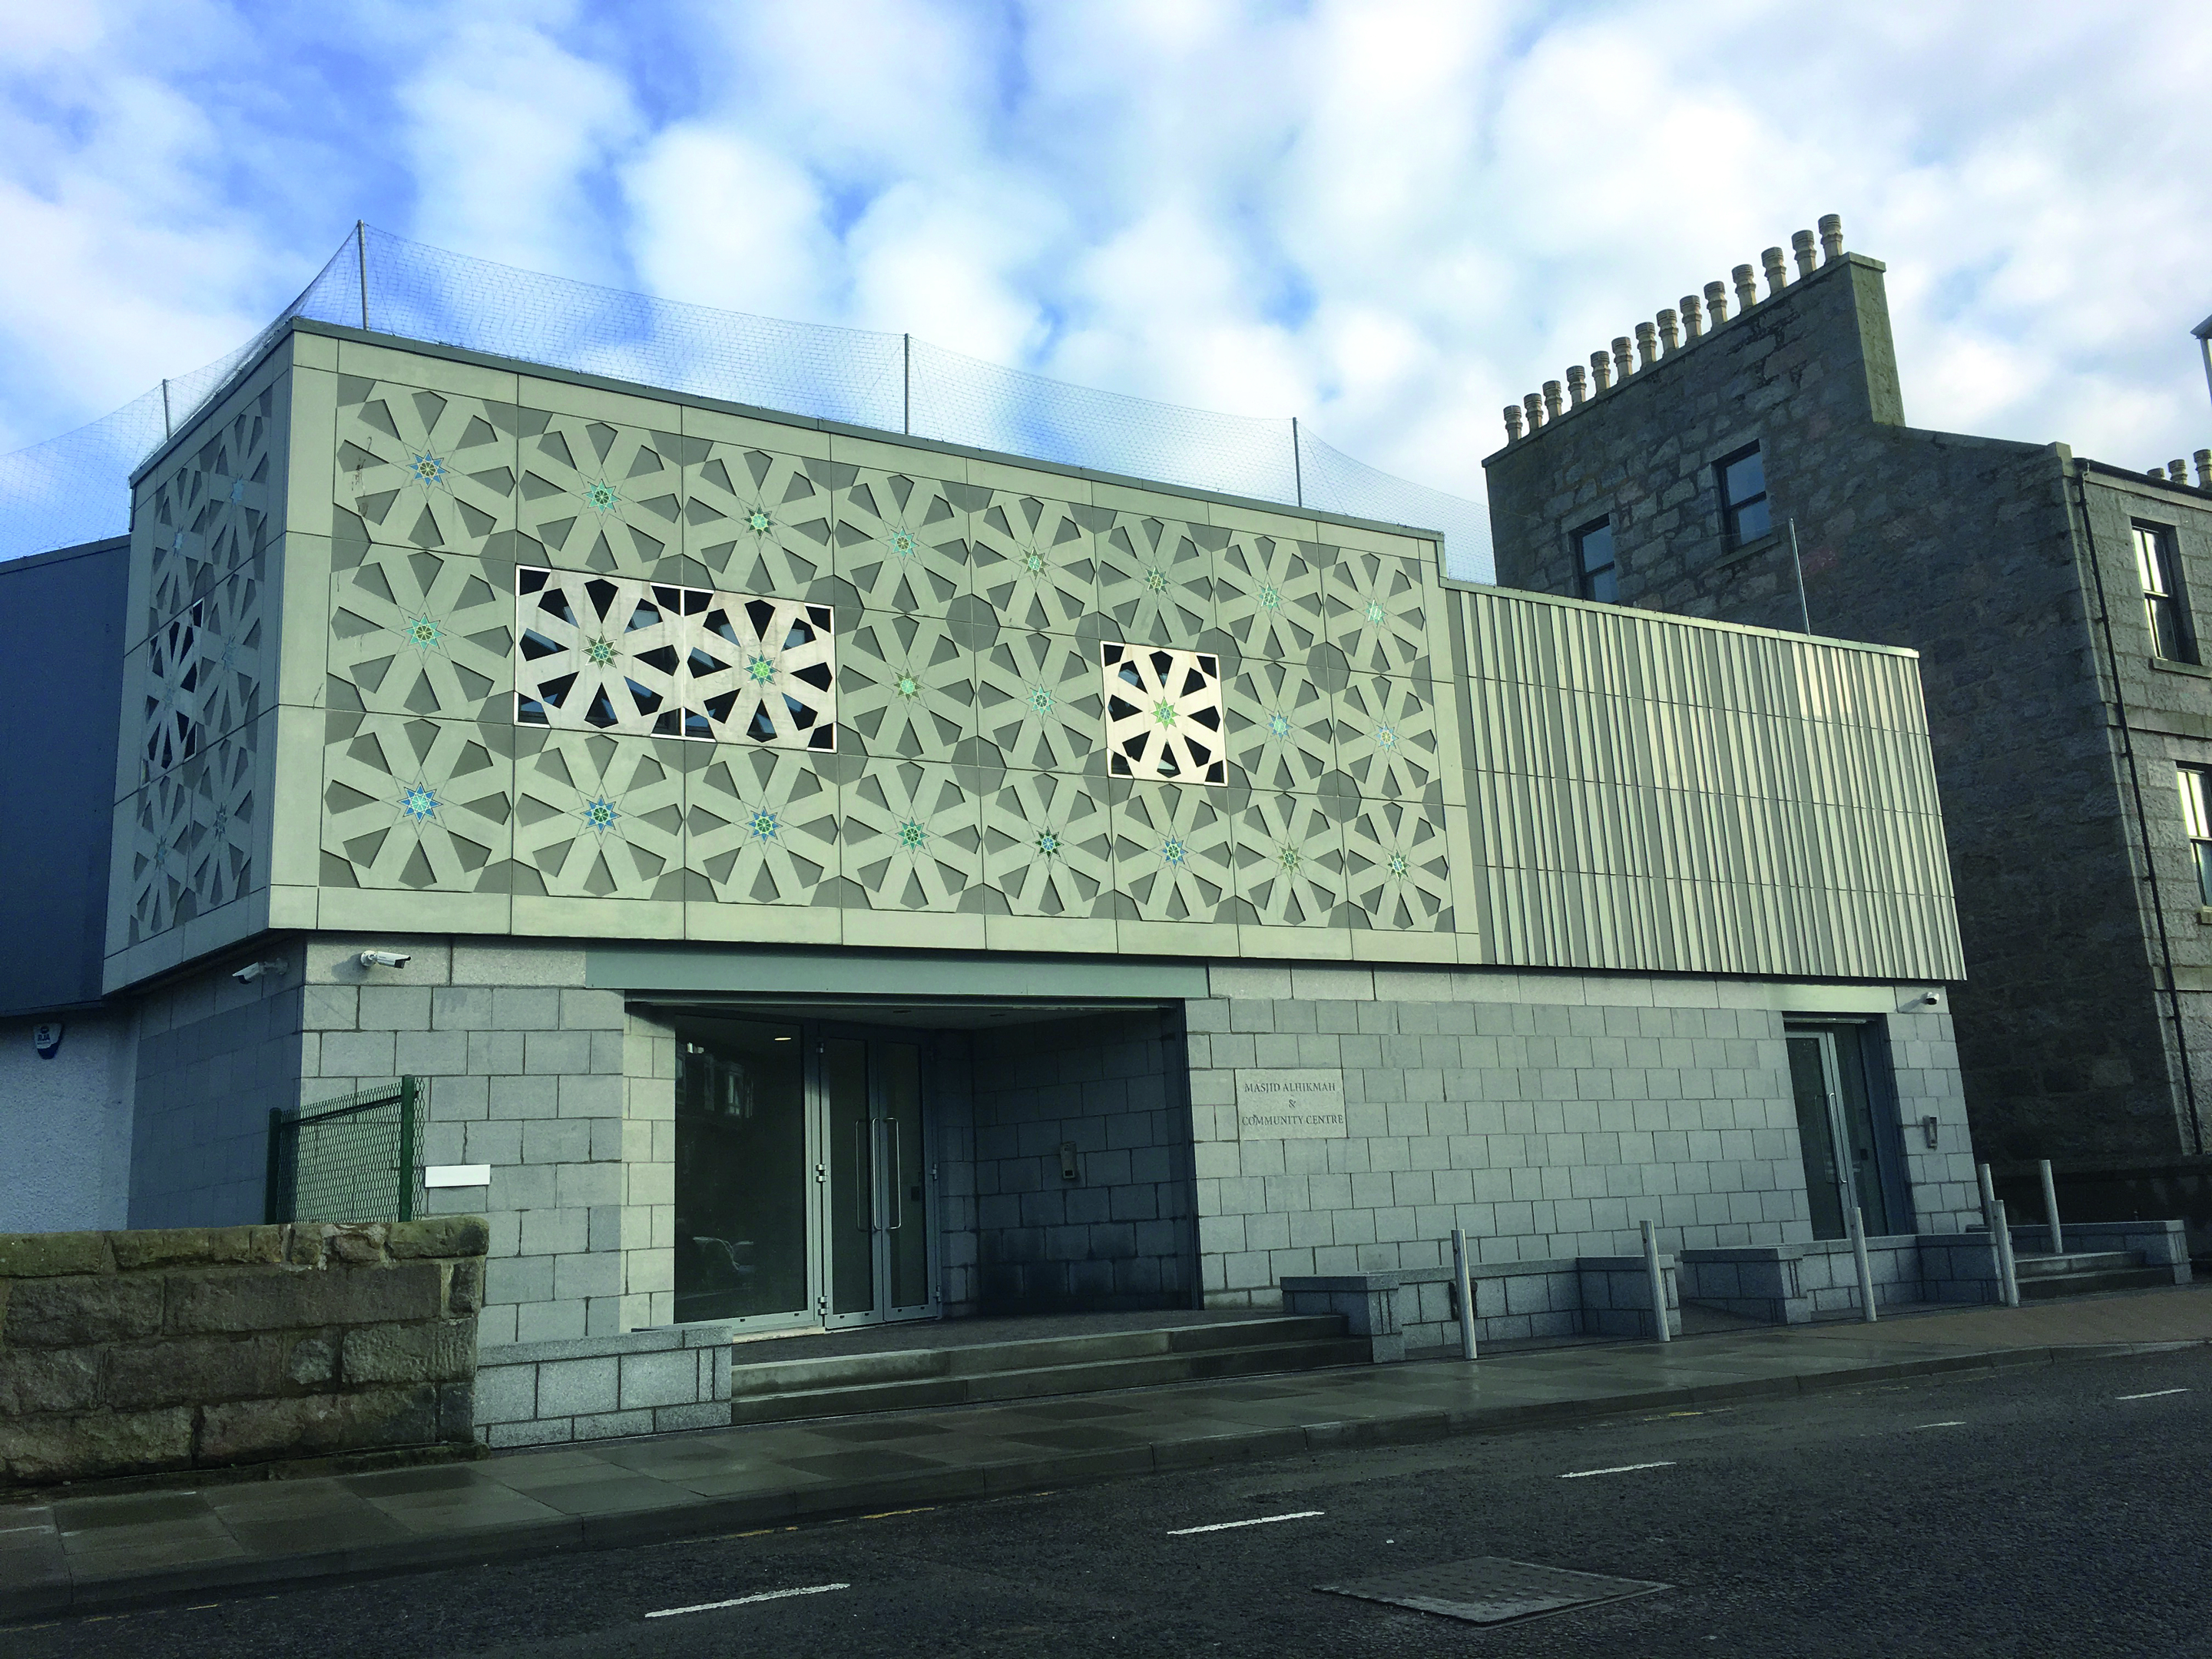 The finishing touches were made to the Masjid Alhikmah on Nelson Street yesterday.